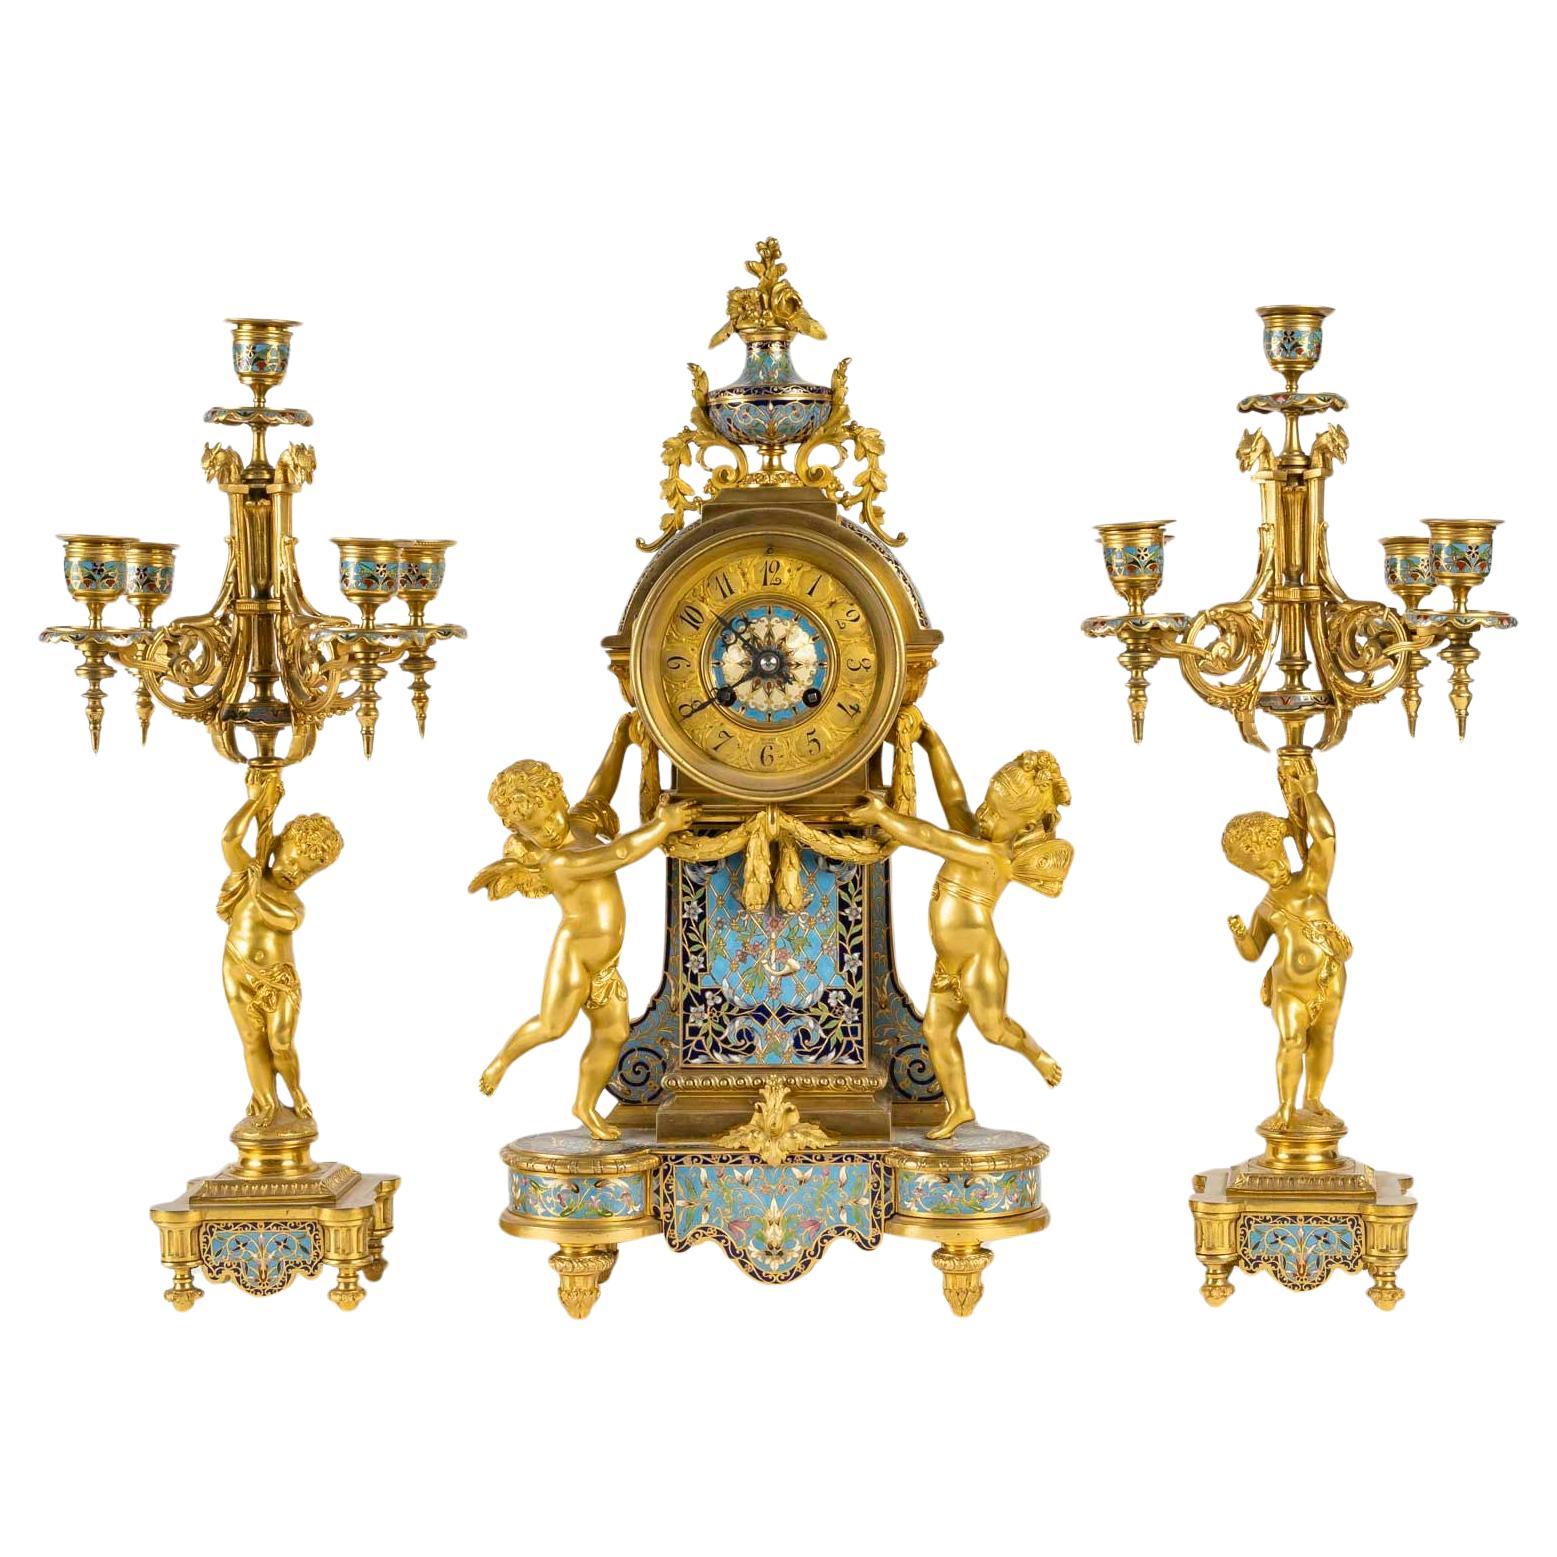 Mantelpiece and Candelabras in Gilt and Cloisonné Bronze, Napoleon Period. For Sale